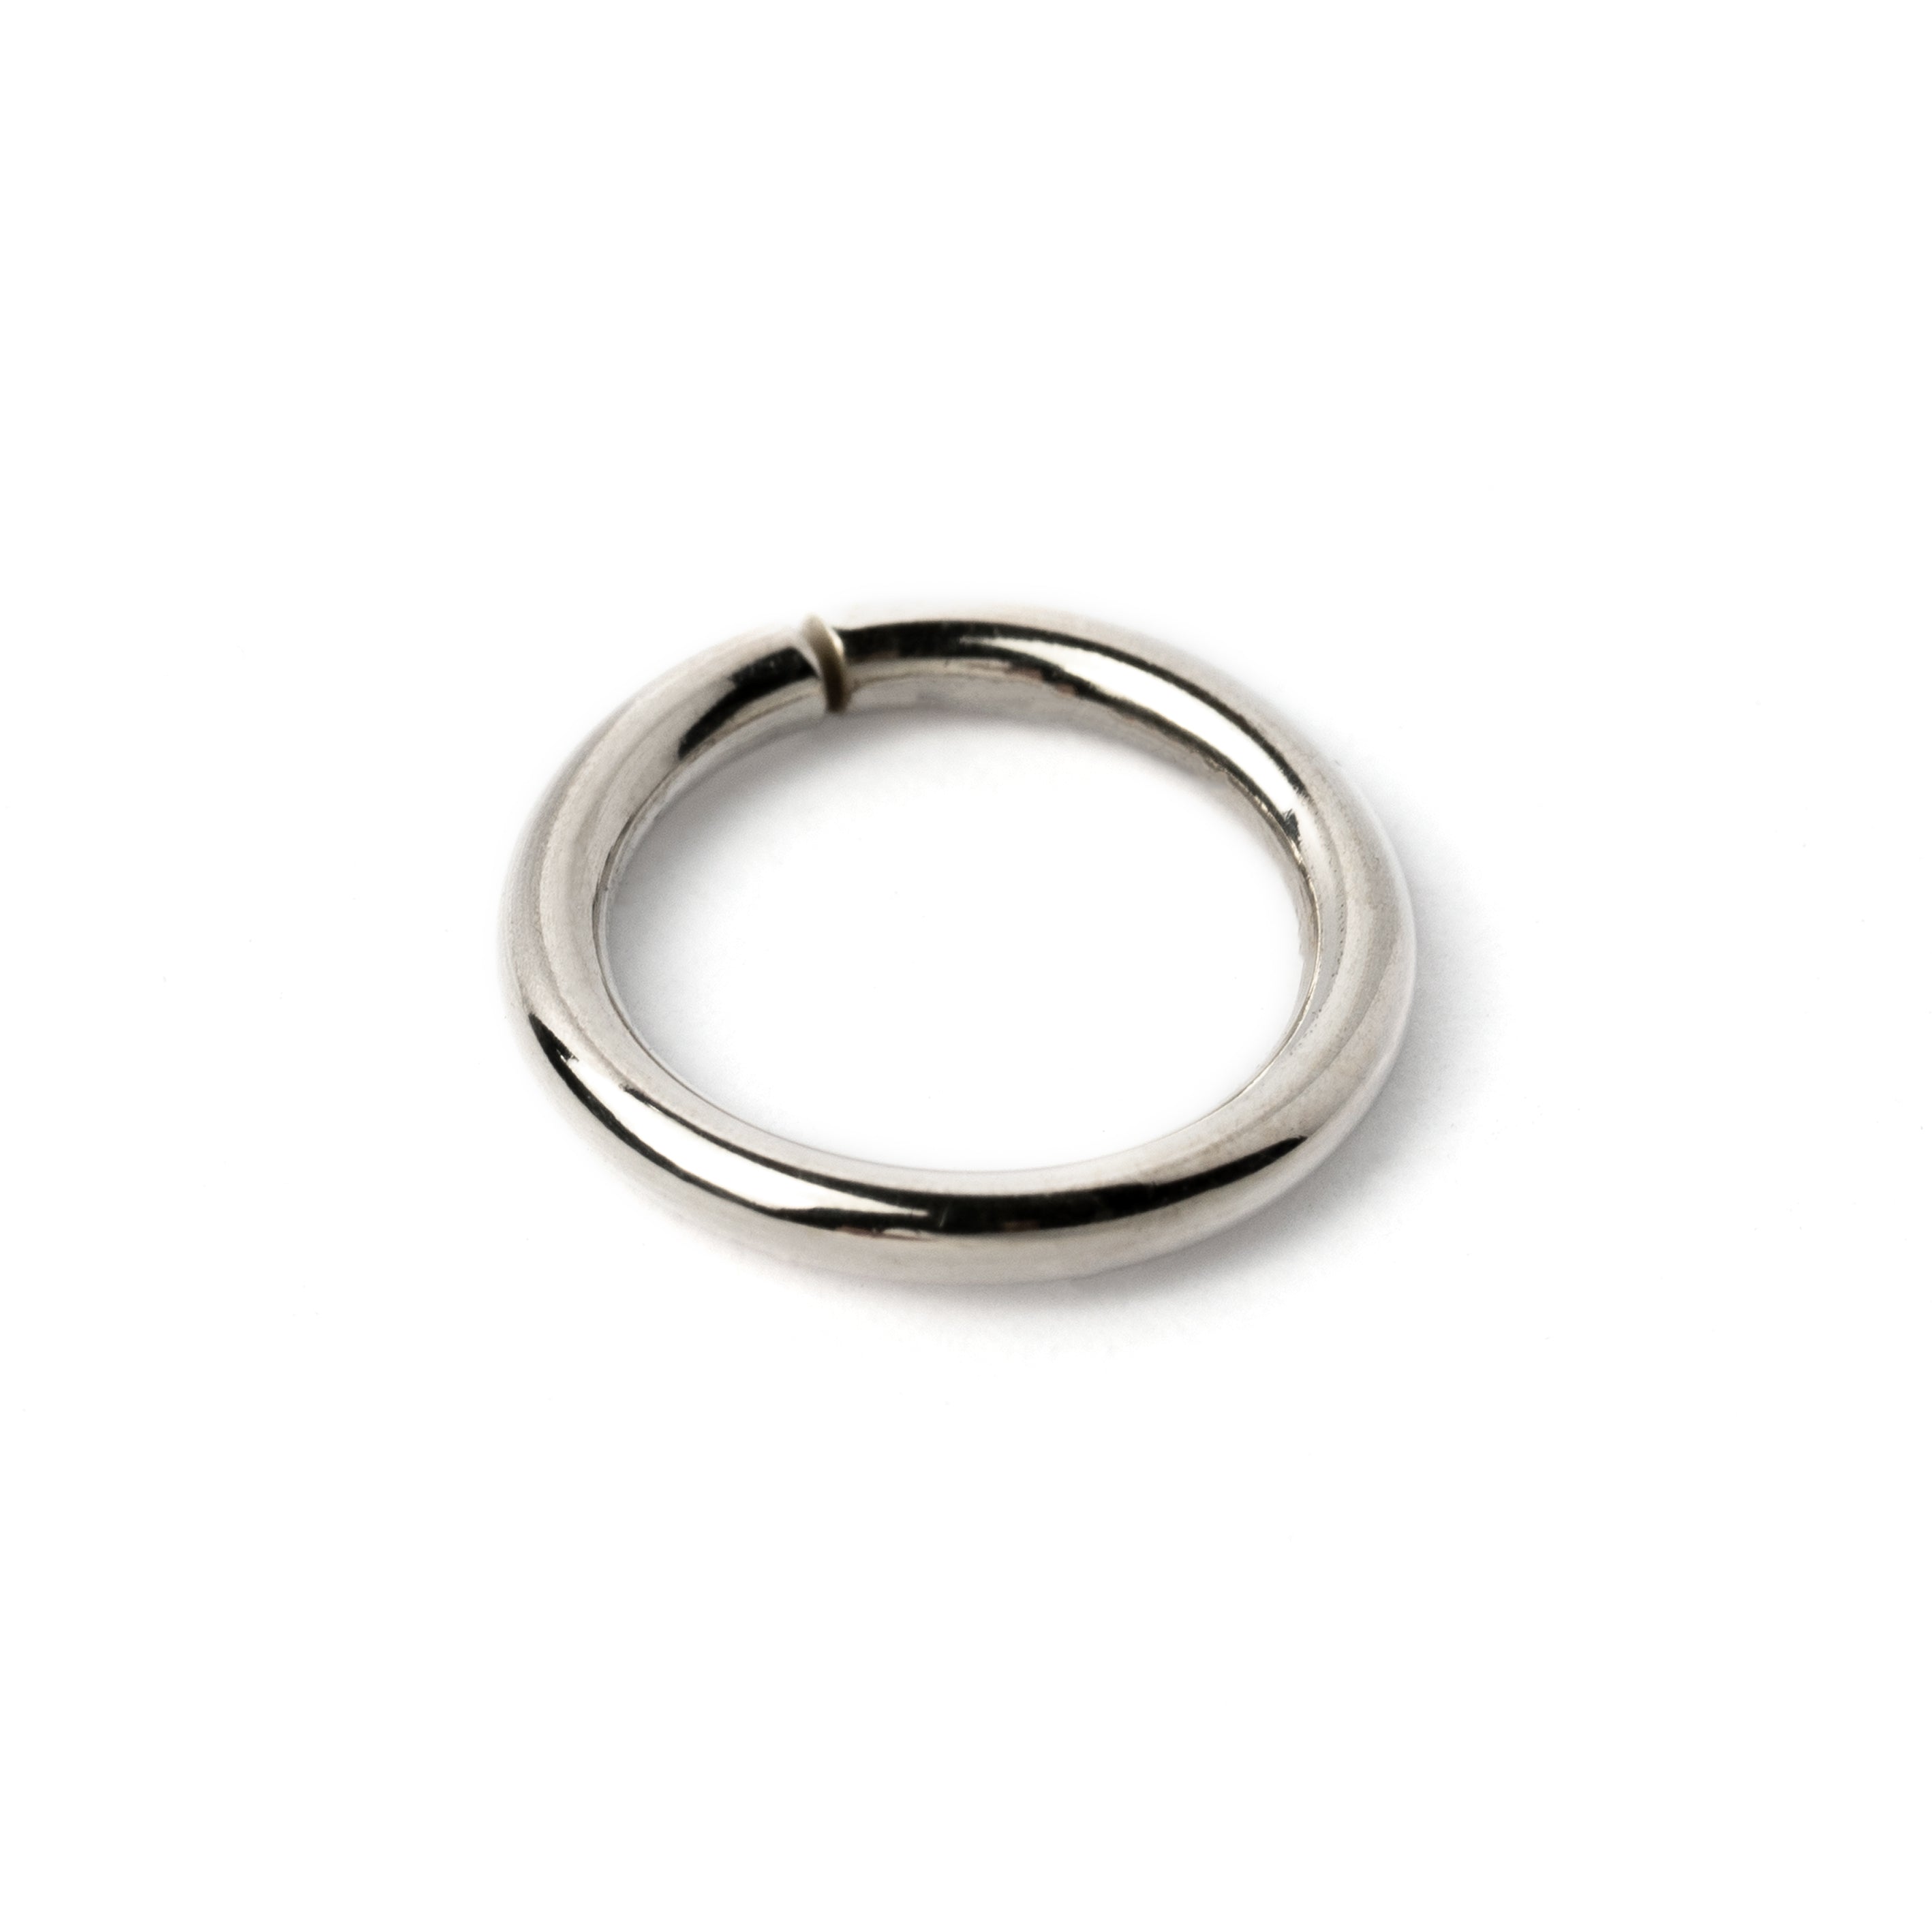 Plain silver seamless piercing ring side view